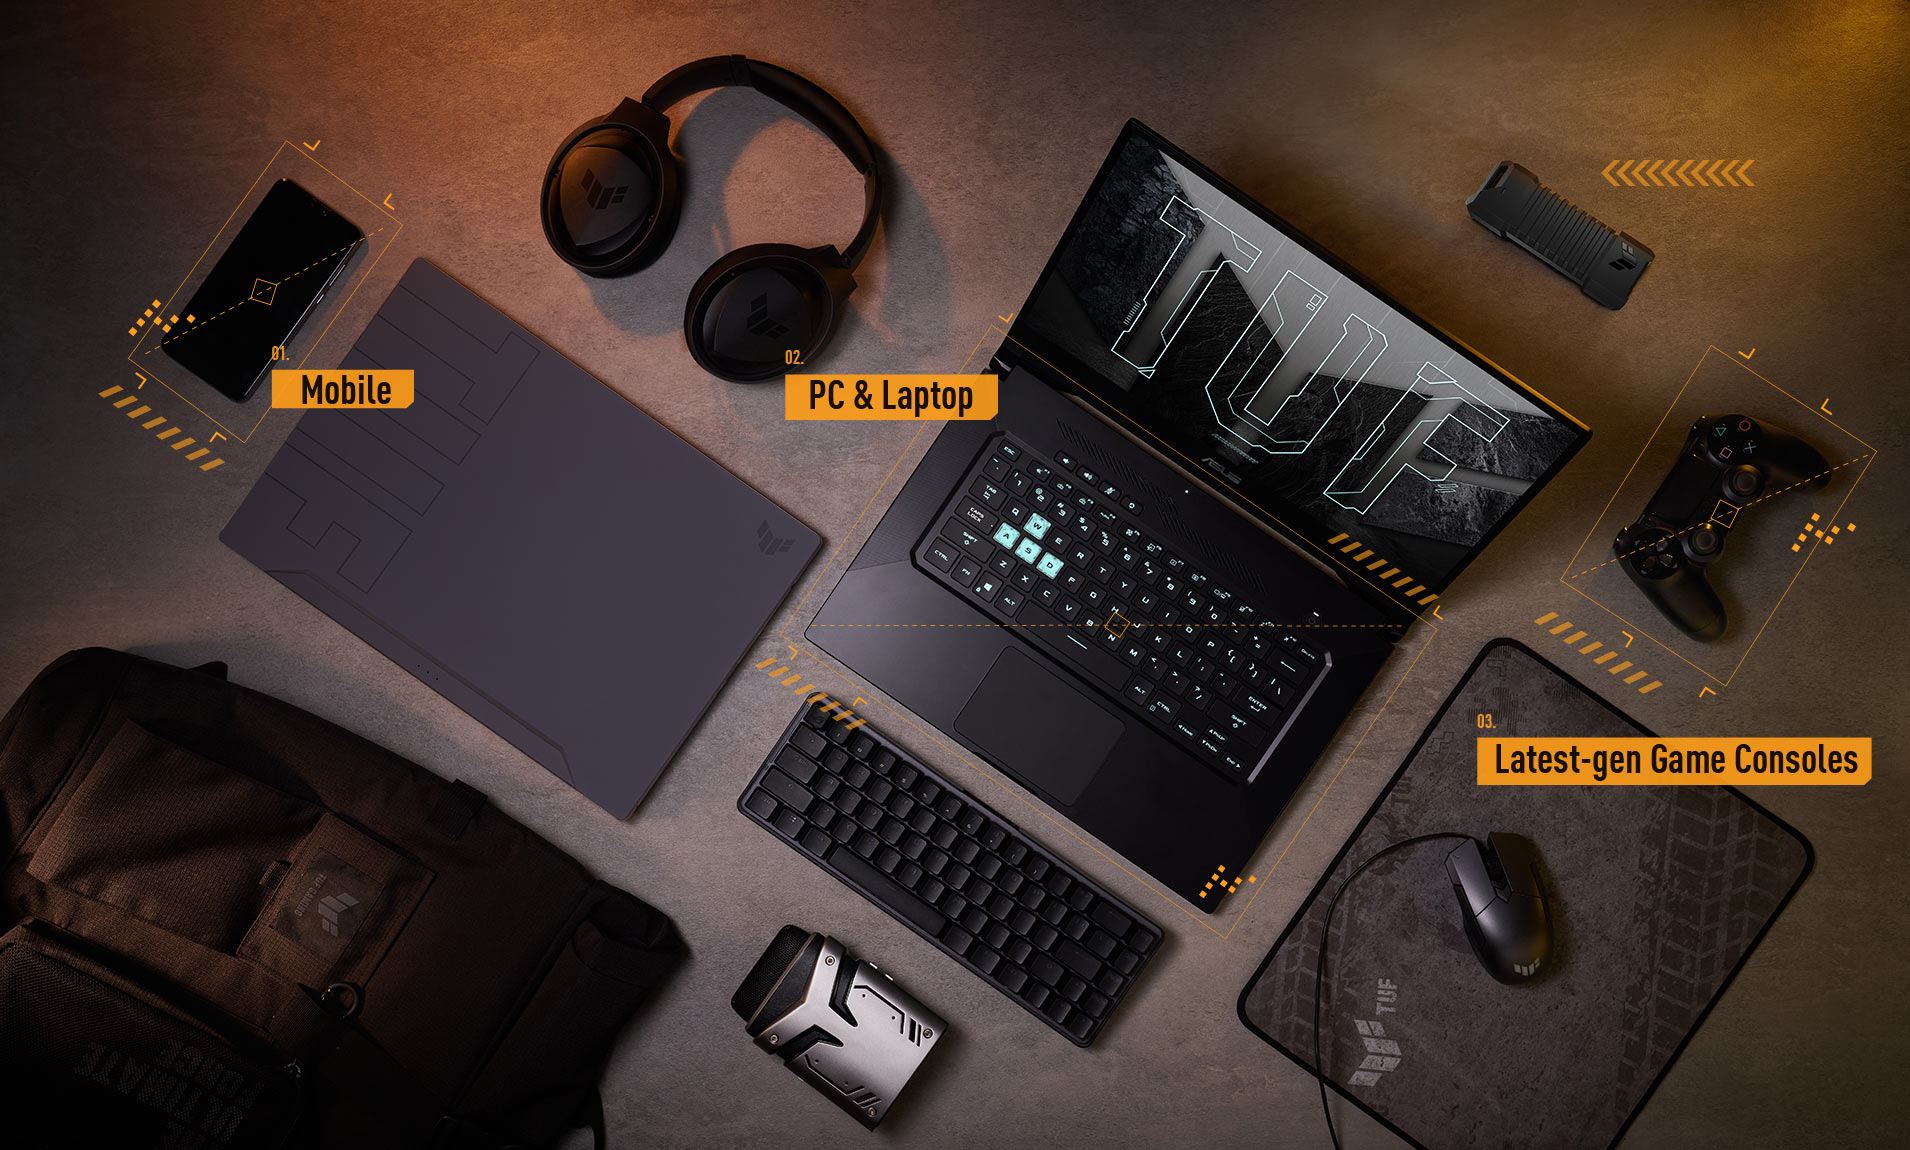 TUF Gaming product line up, including a laptop, a headset, a mouse and some other peripherals.